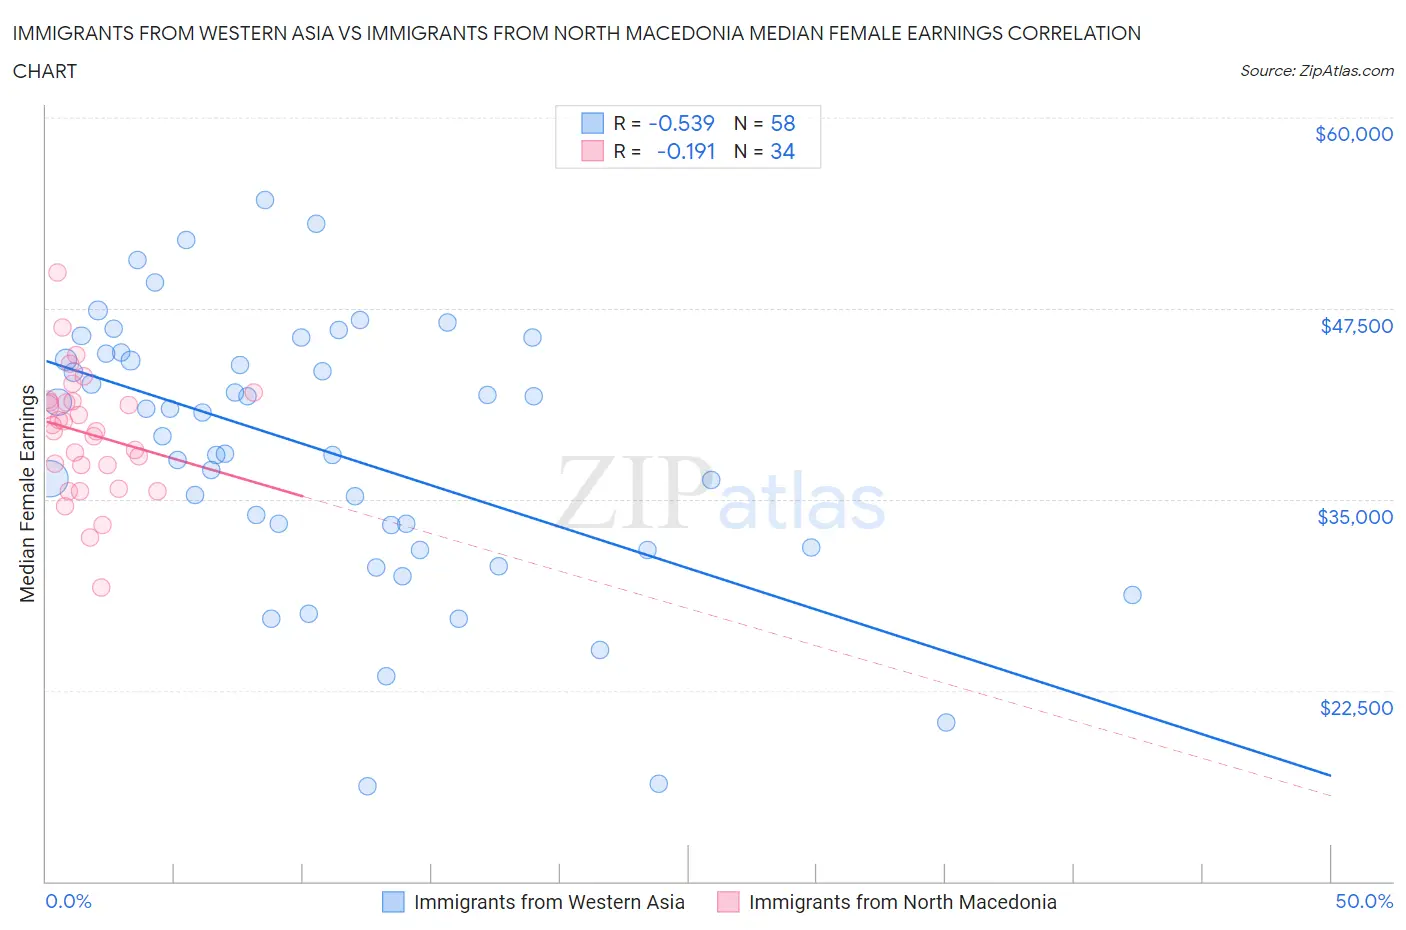 Immigrants from Western Asia vs Immigrants from North Macedonia Median Female Earnings